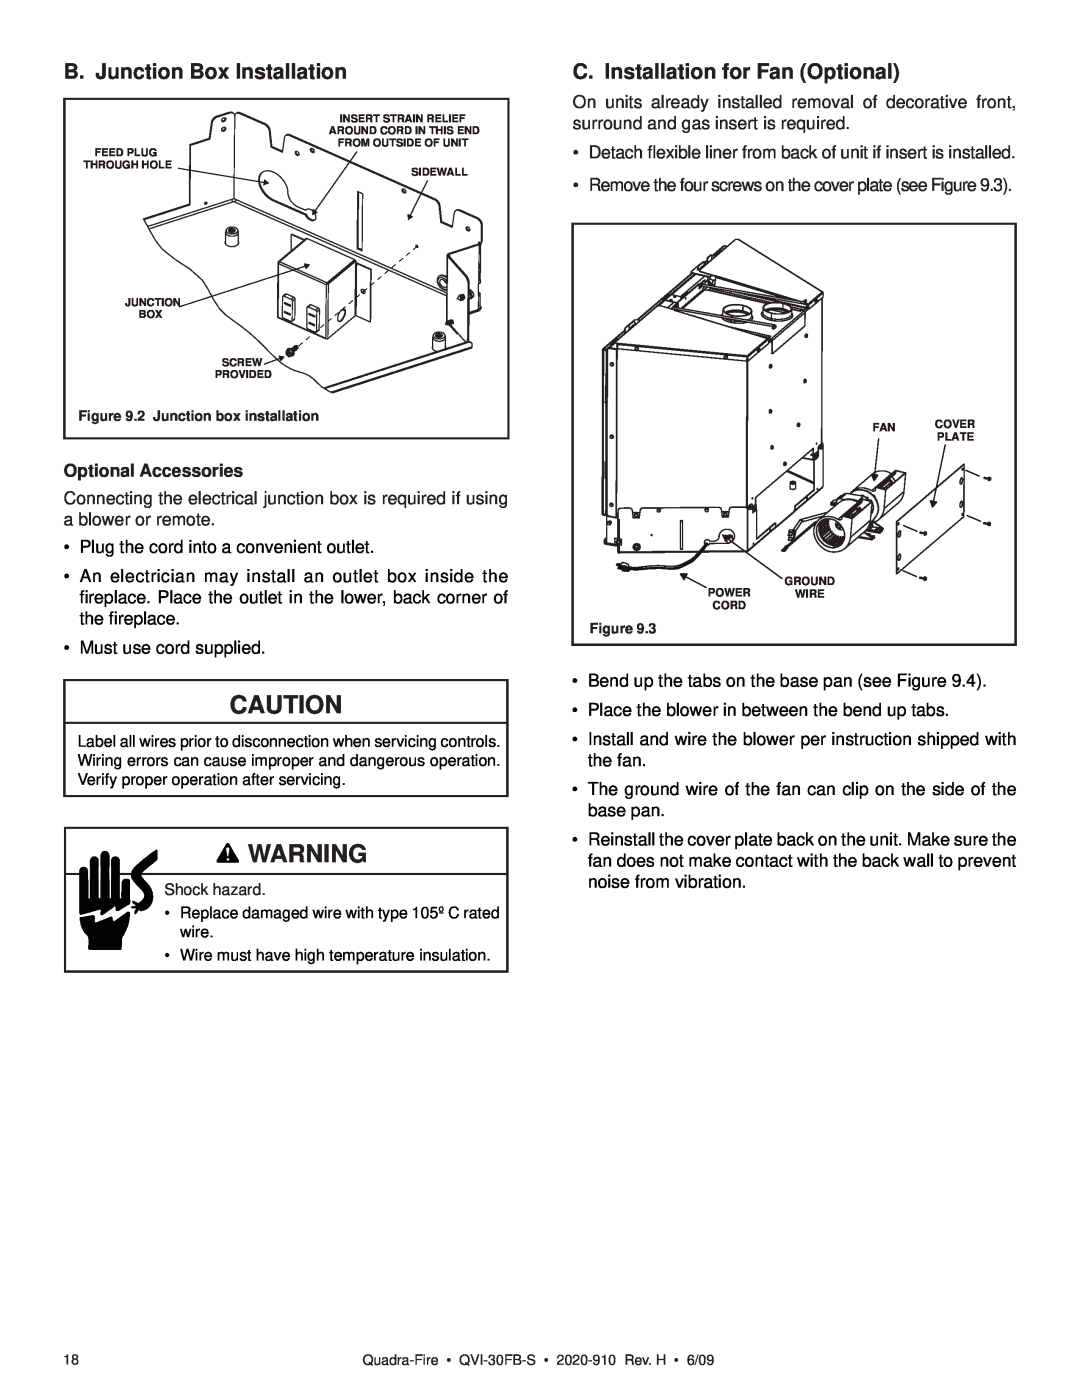 Quadra-Fire QVI-30FB-S owner manual B. Junction Box Installation, C. Installation for Fan Optional, Optional Accessories 